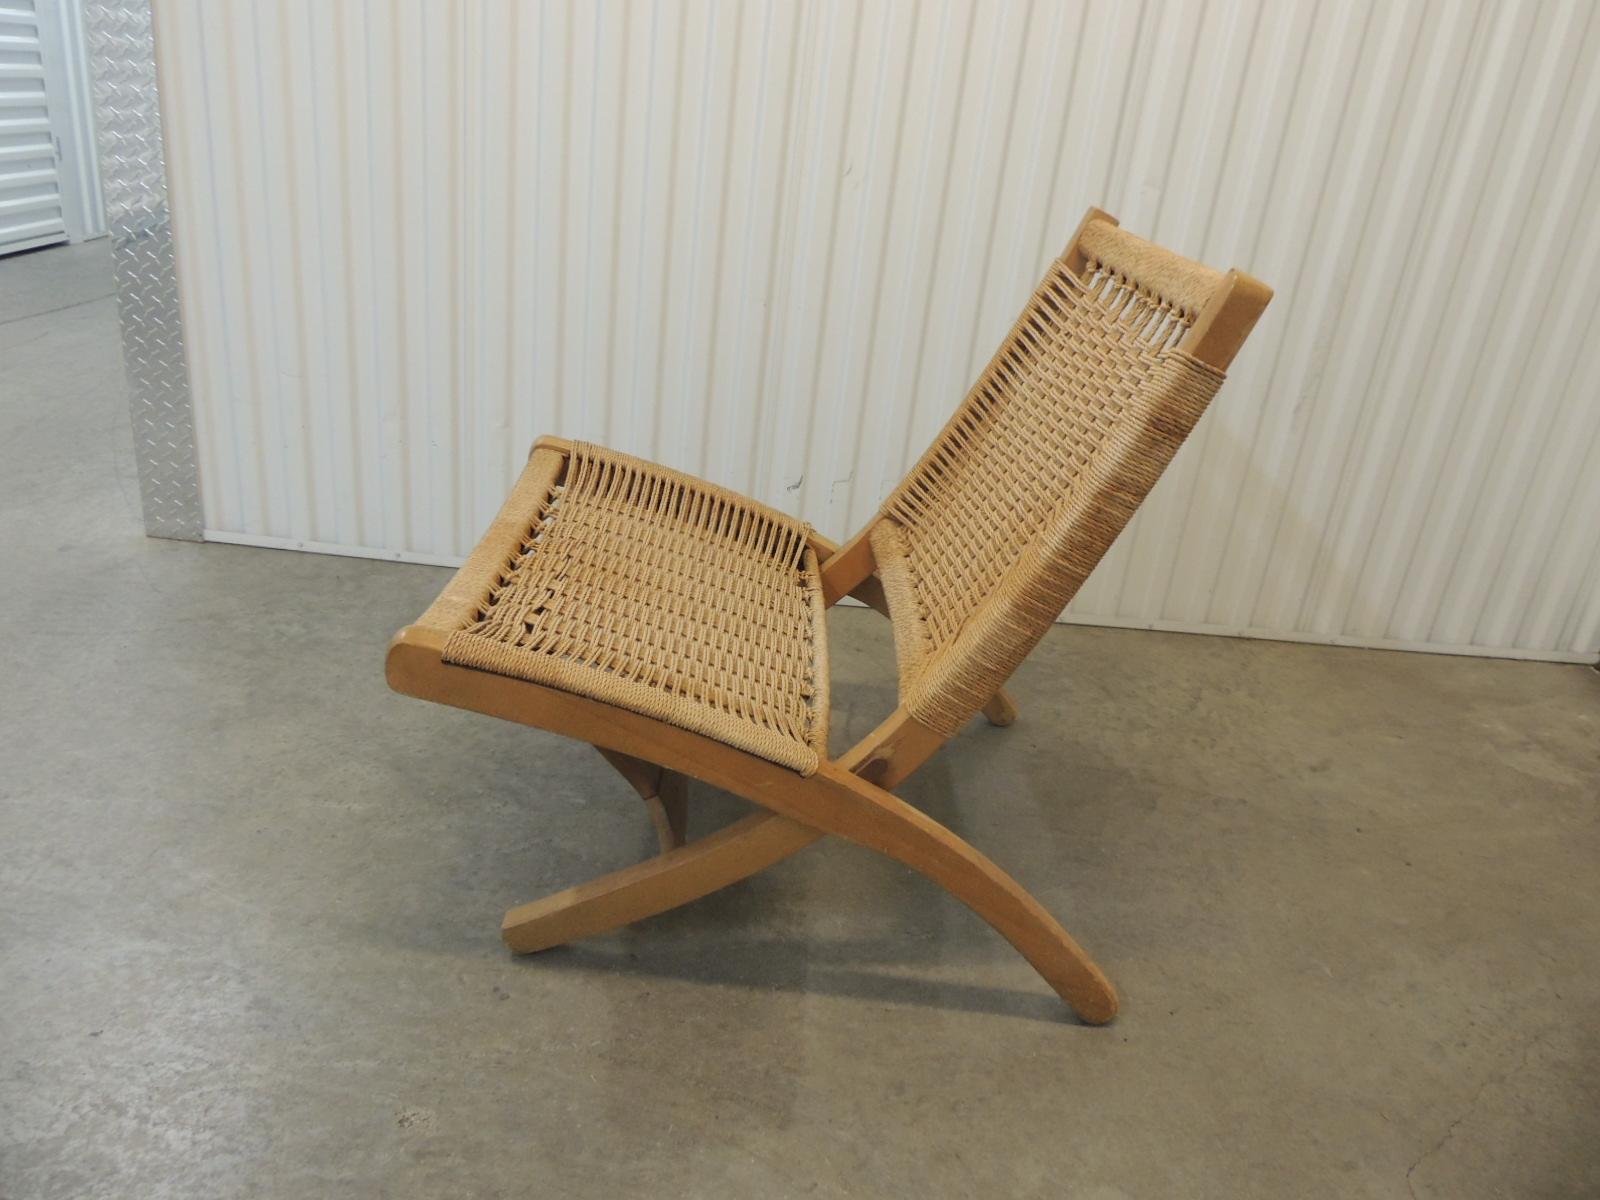 Mid-Century Modern Hans Wegner style chair.
Midcentury folding woven side chair rope/twine woven upholstery.
Lounge chair with wood frame. aka Rush Seat and back.
Size: 24 W x 30 D x 17 S.D. x 14.5 H x 29.5 BH.
 